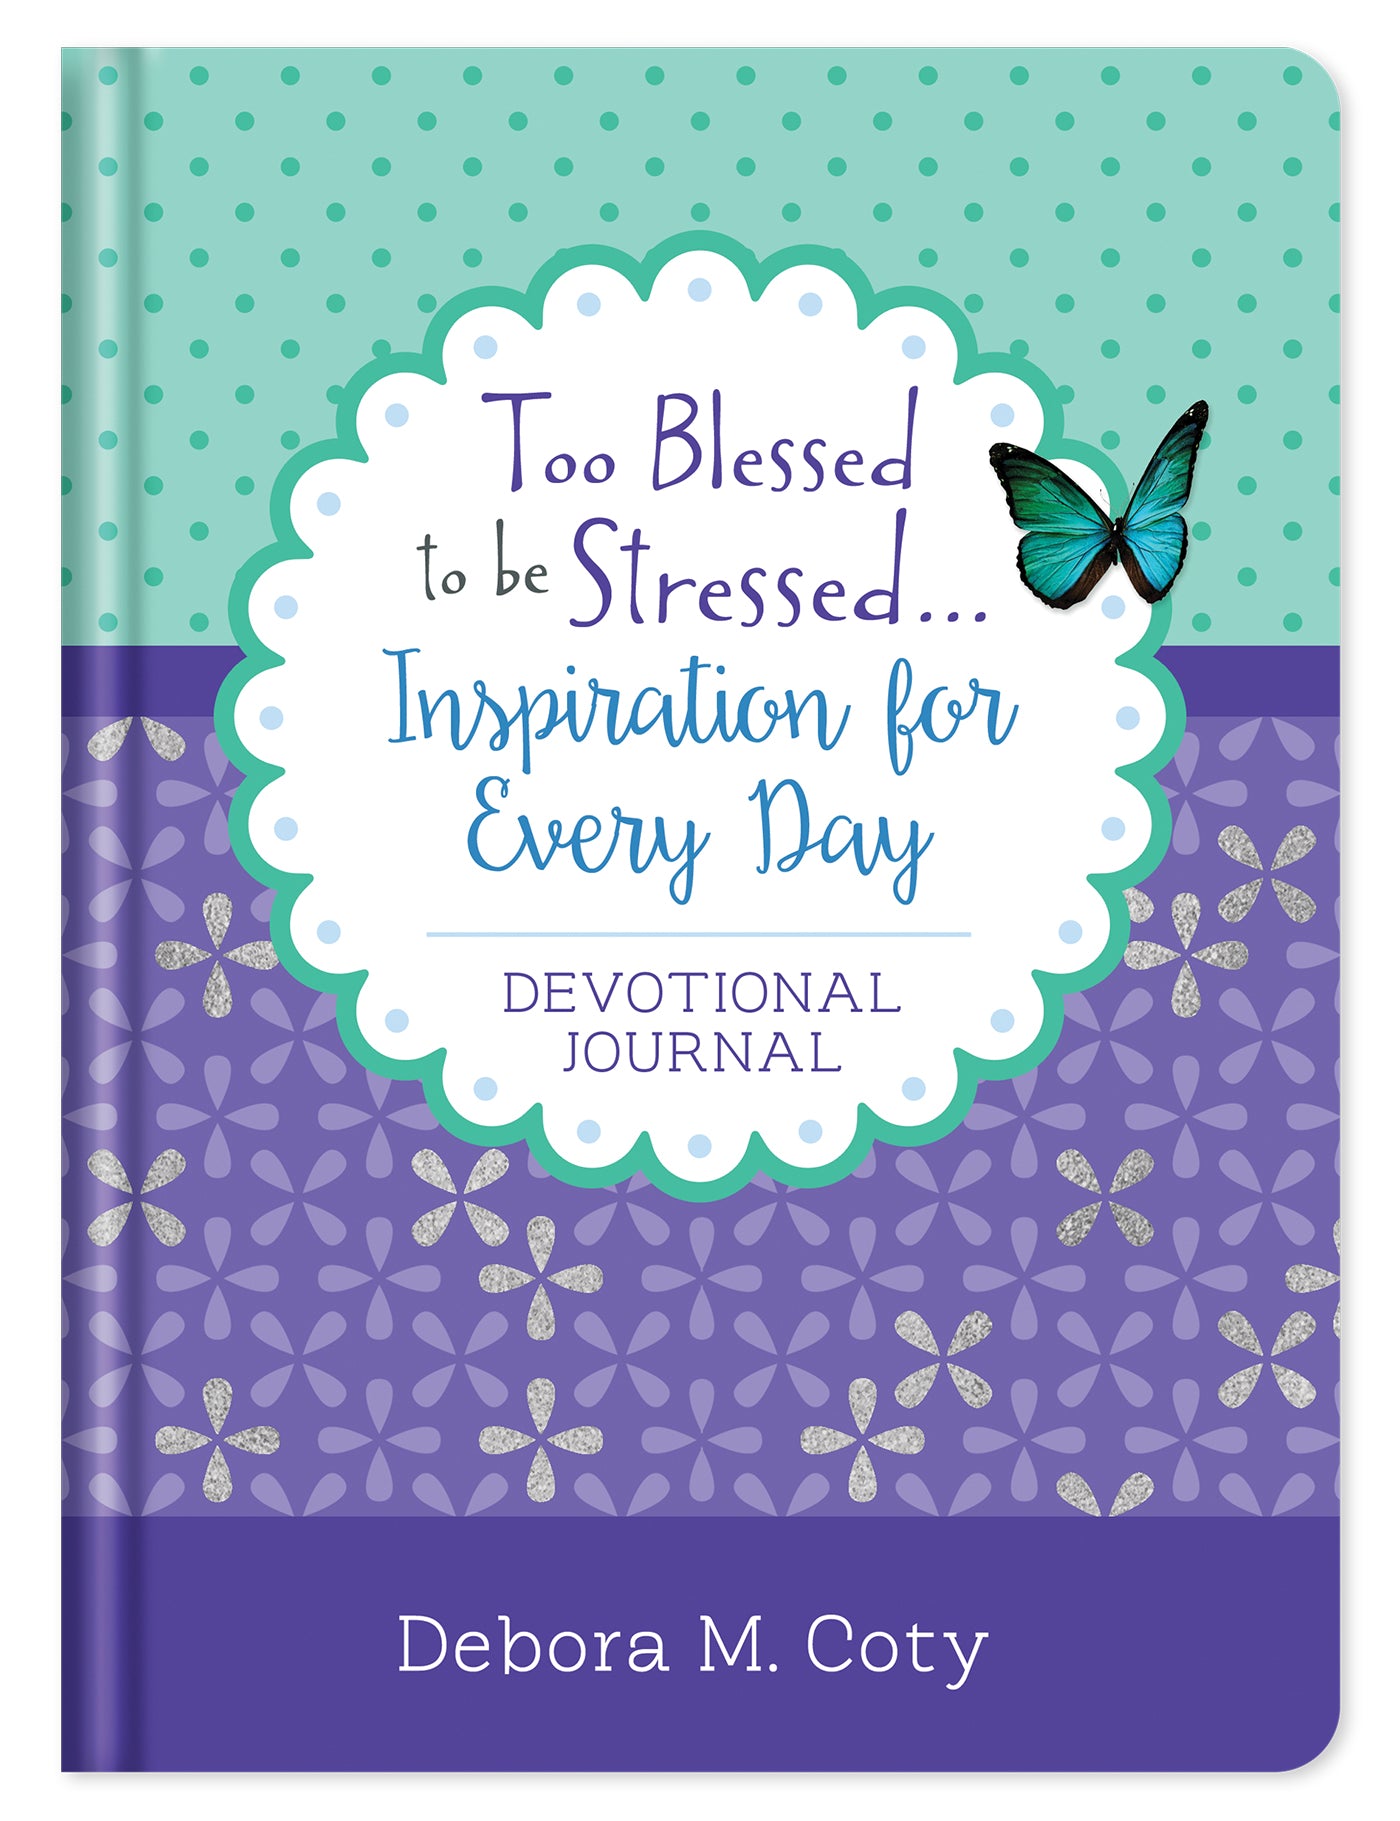 Too Blessed to be Stressed. . .Inspiration for Every Day Devotional Journal - The Christian Gift Company